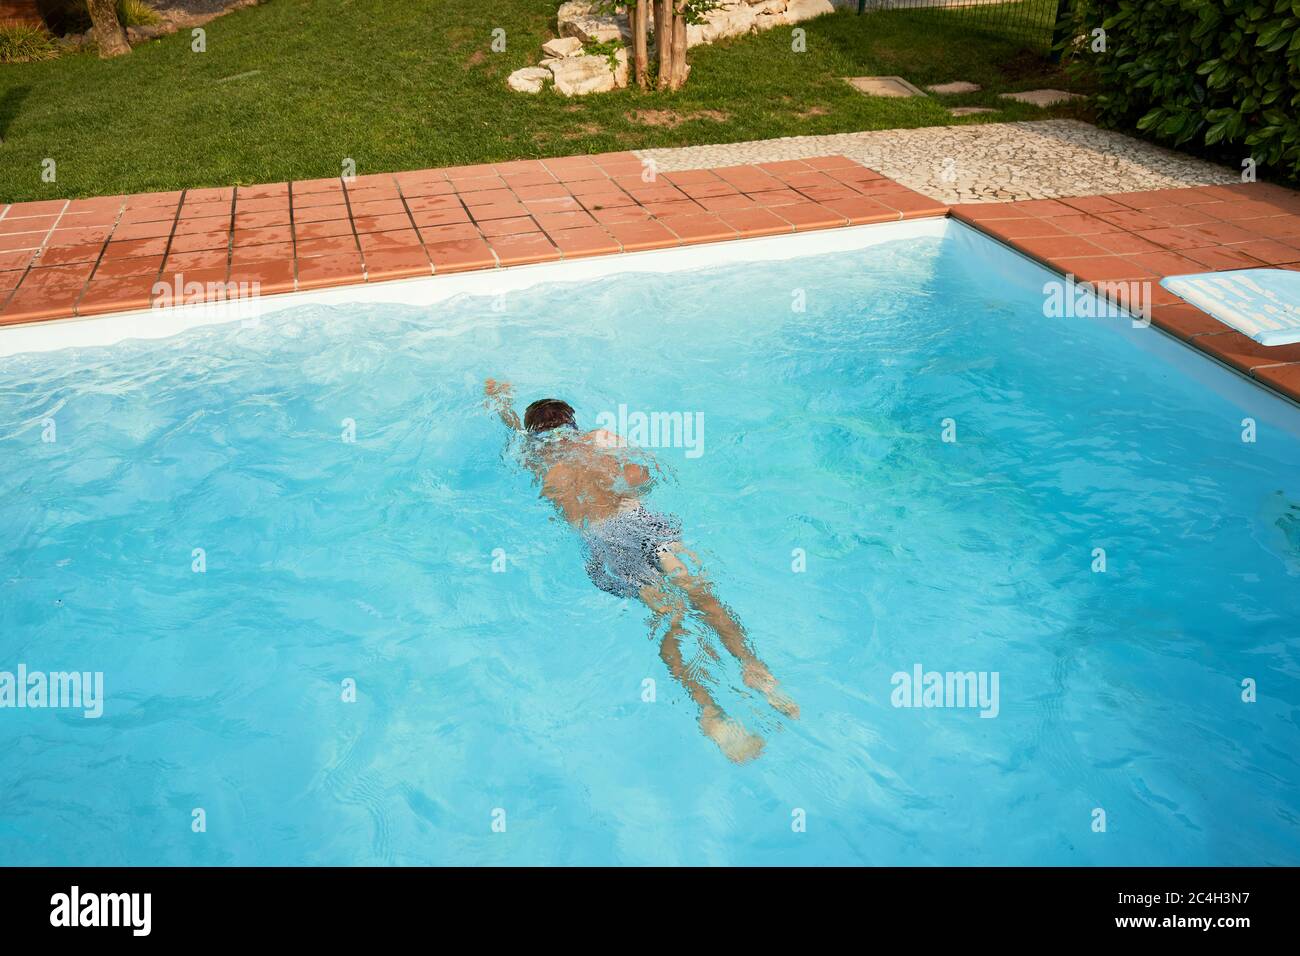 Boy swimming in the open pool in summer Stock Photo